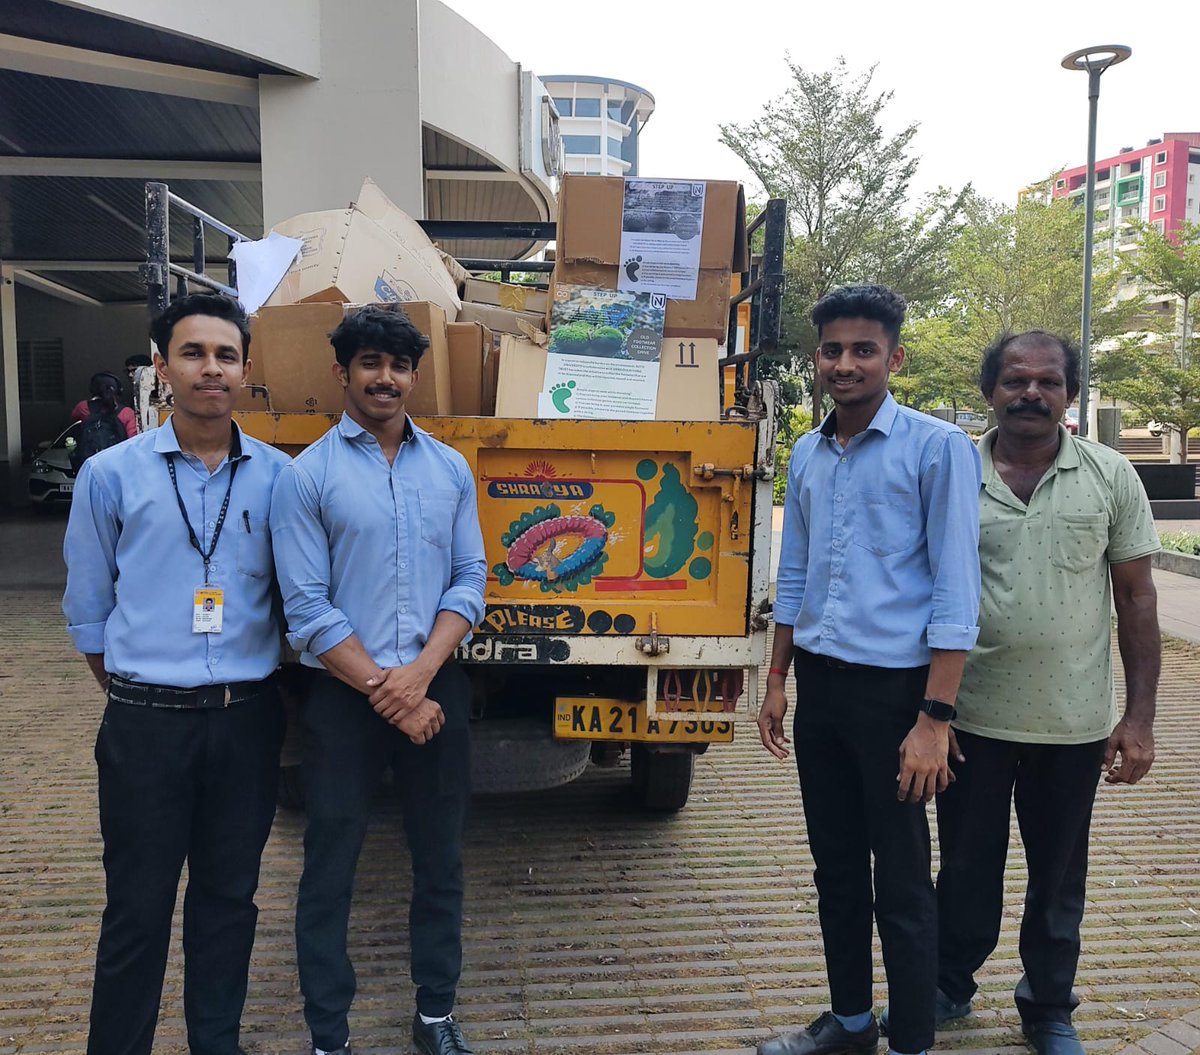 NSSUnit of NITTEUNIVERSITY with PROJECTHEJJE by VANACHARITABLETRUST has taken the initiative to collect the footwear that are to be disposed&reused&recycled around the campus.Around 630pairs of footwear were collected during the initiative.@YASMinistry @_NSSIndia @ianuragthakur